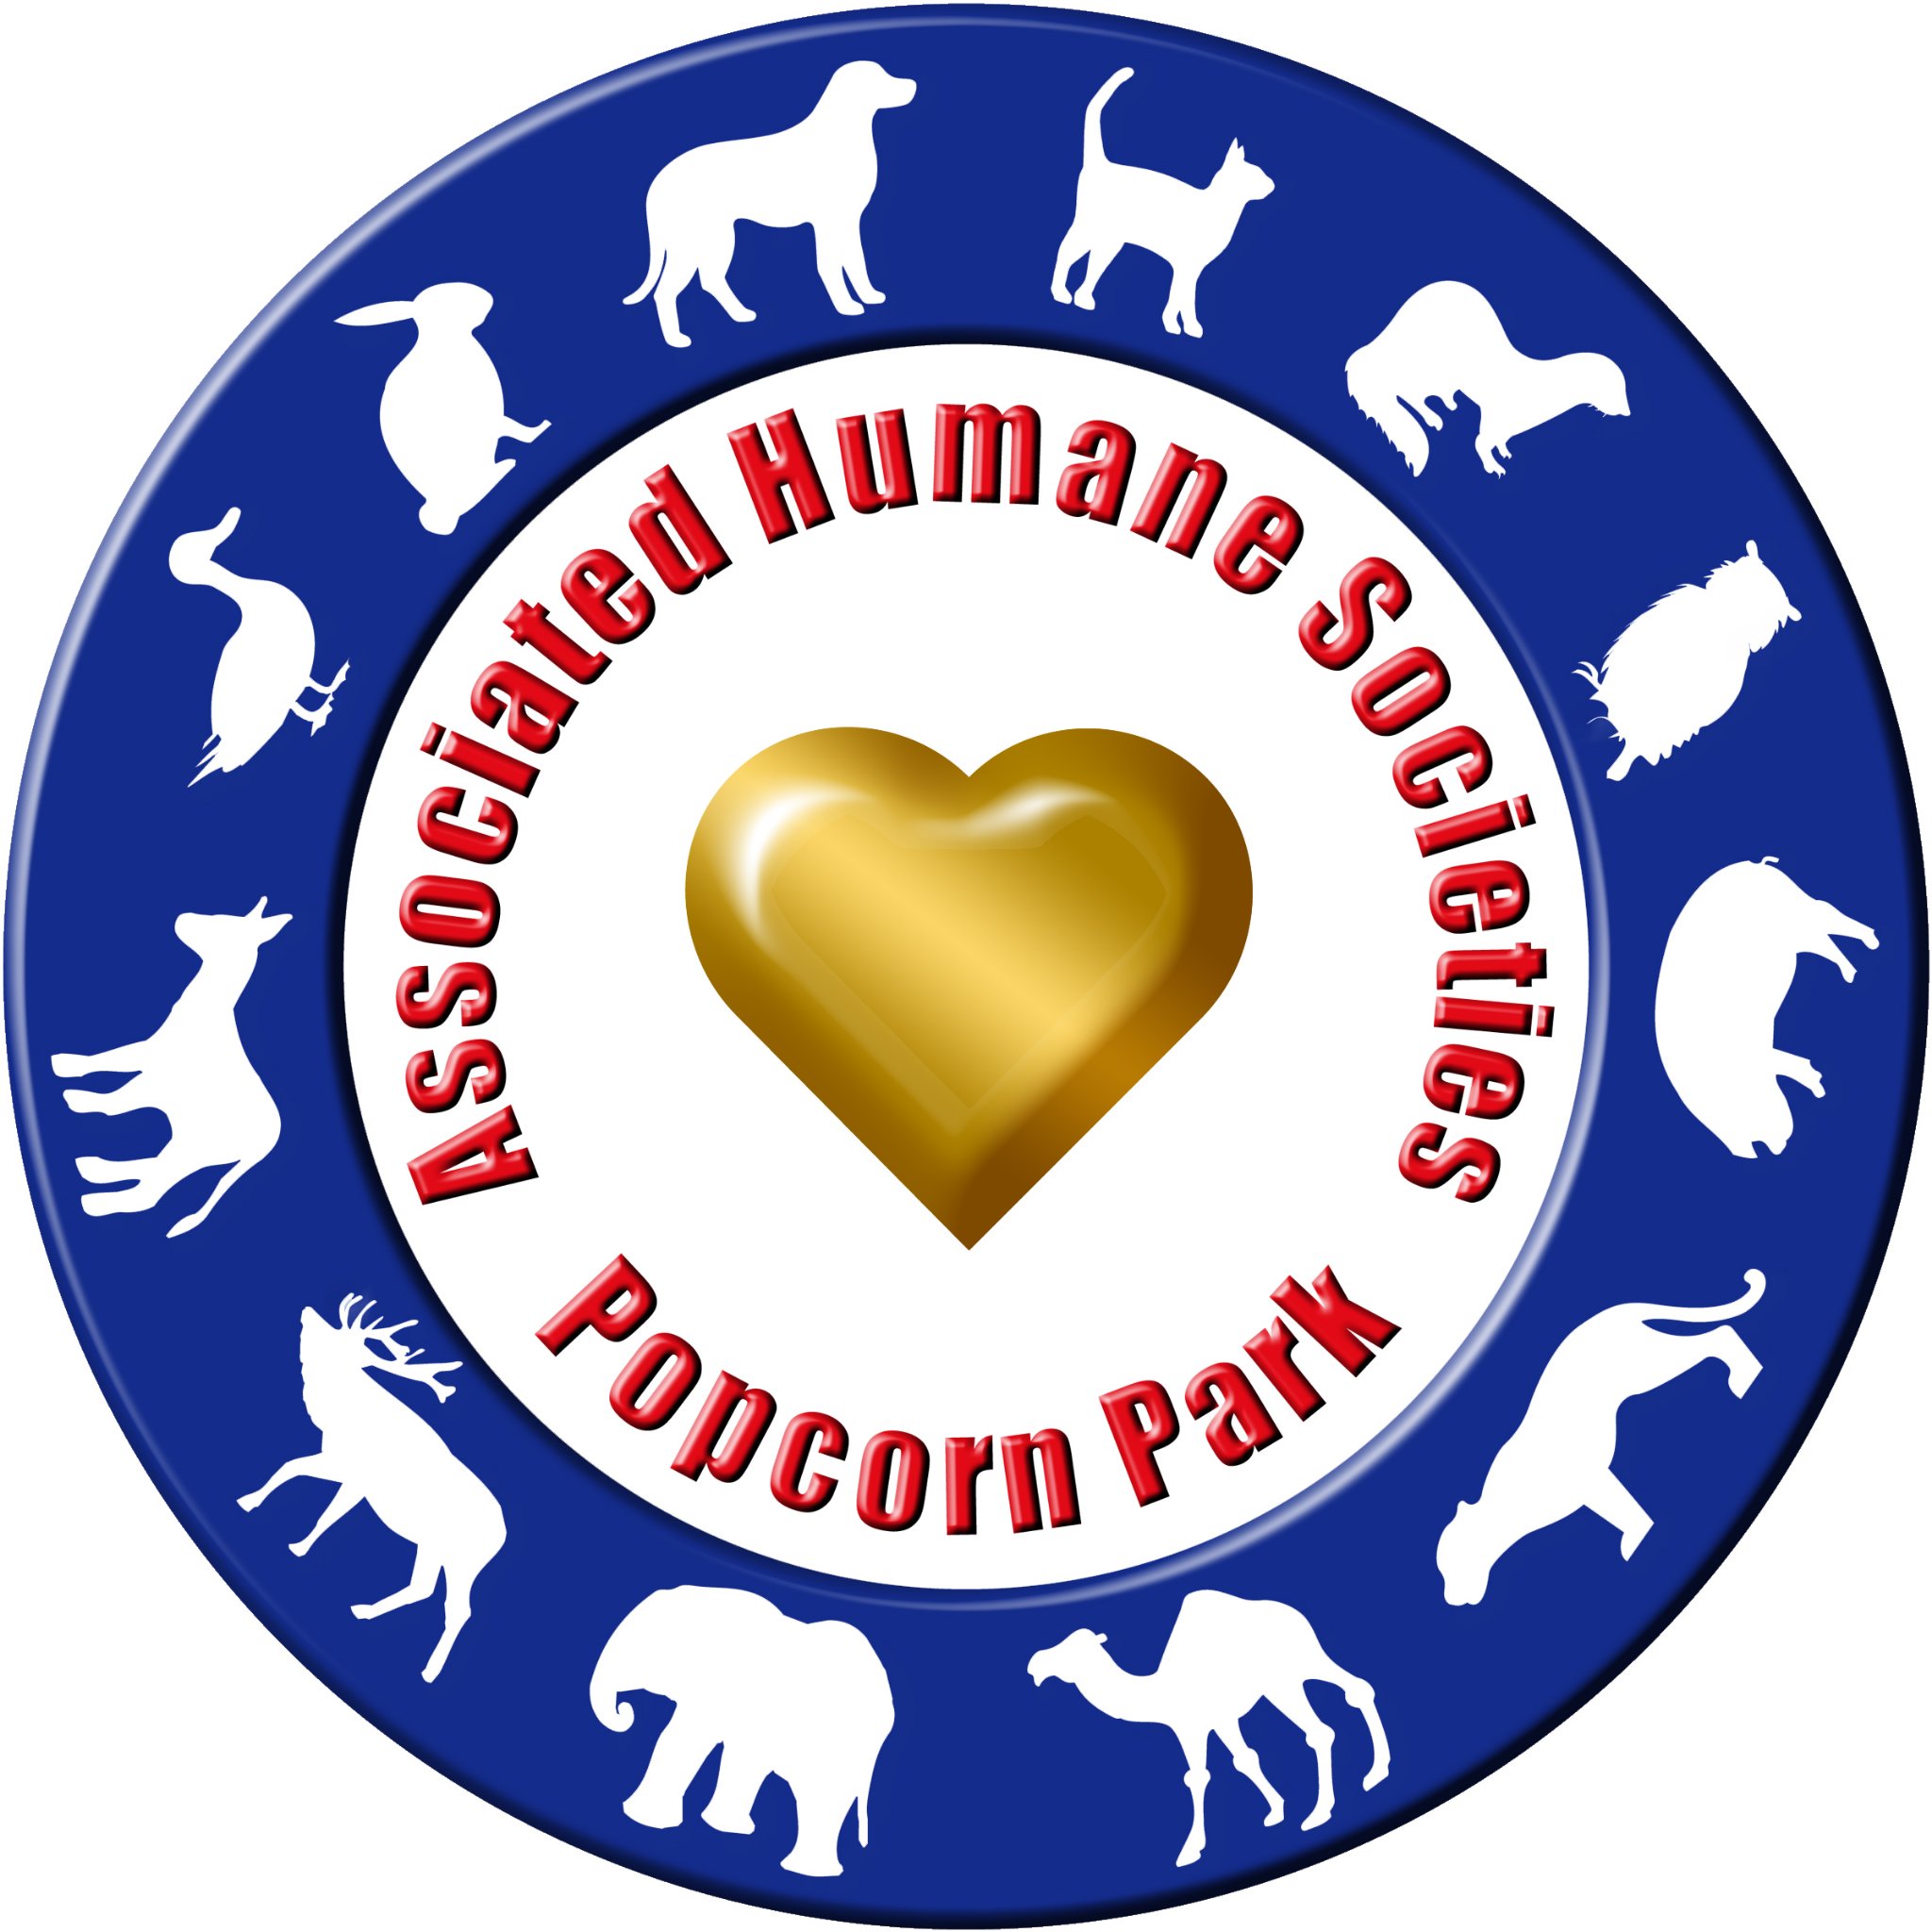 We are Associated Humane Societies/Popcorn Park, a 501c3 organization in Forked River, NJ.  We are an animal shelter/rescue that cares for hundreds of animals.